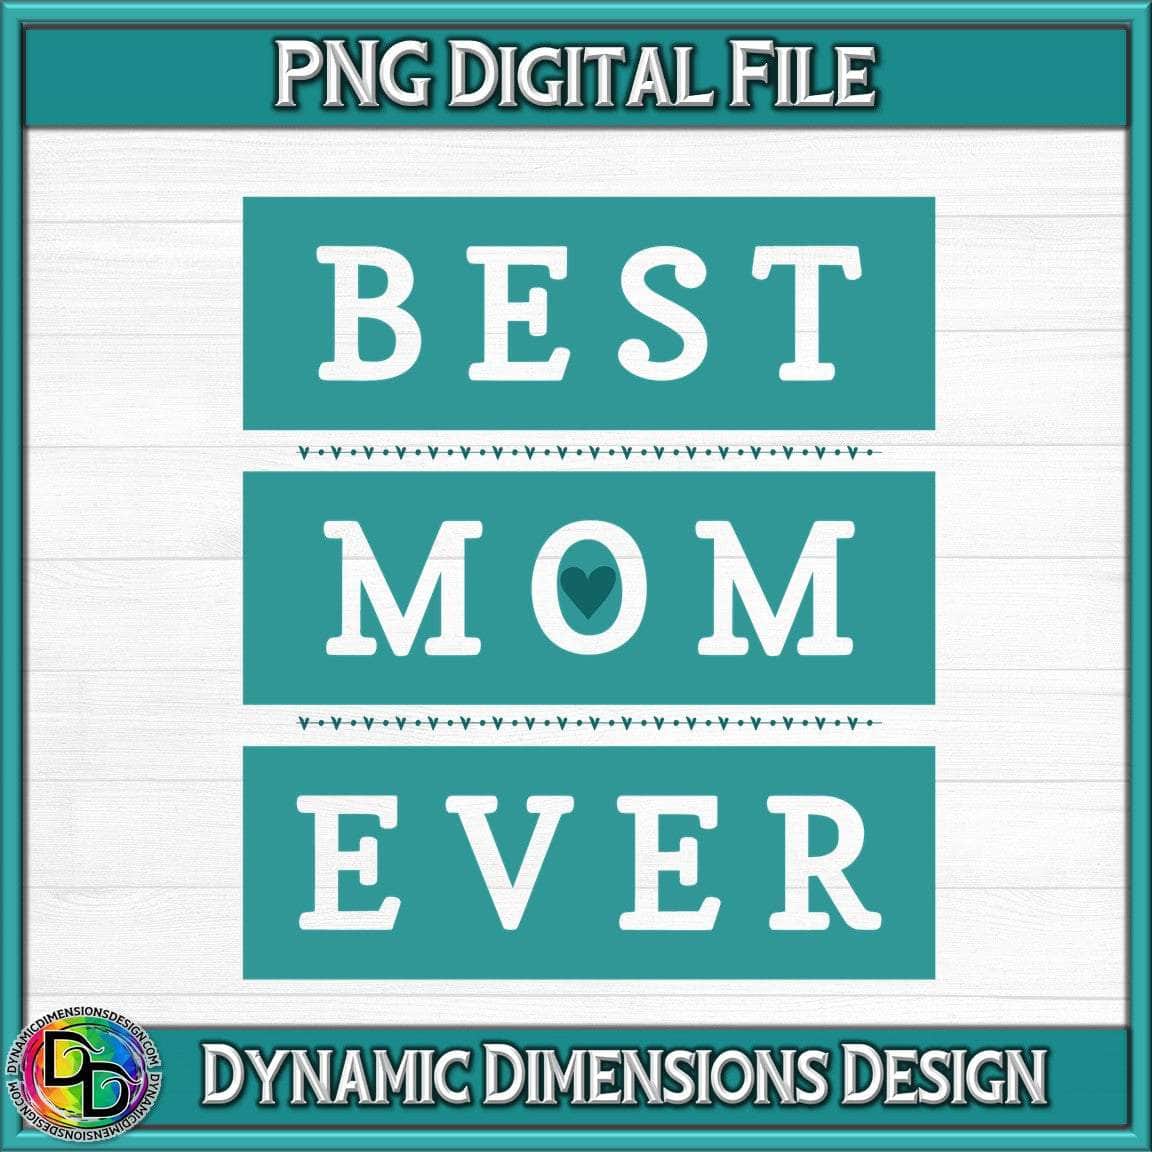 Best Mom Ever PNG